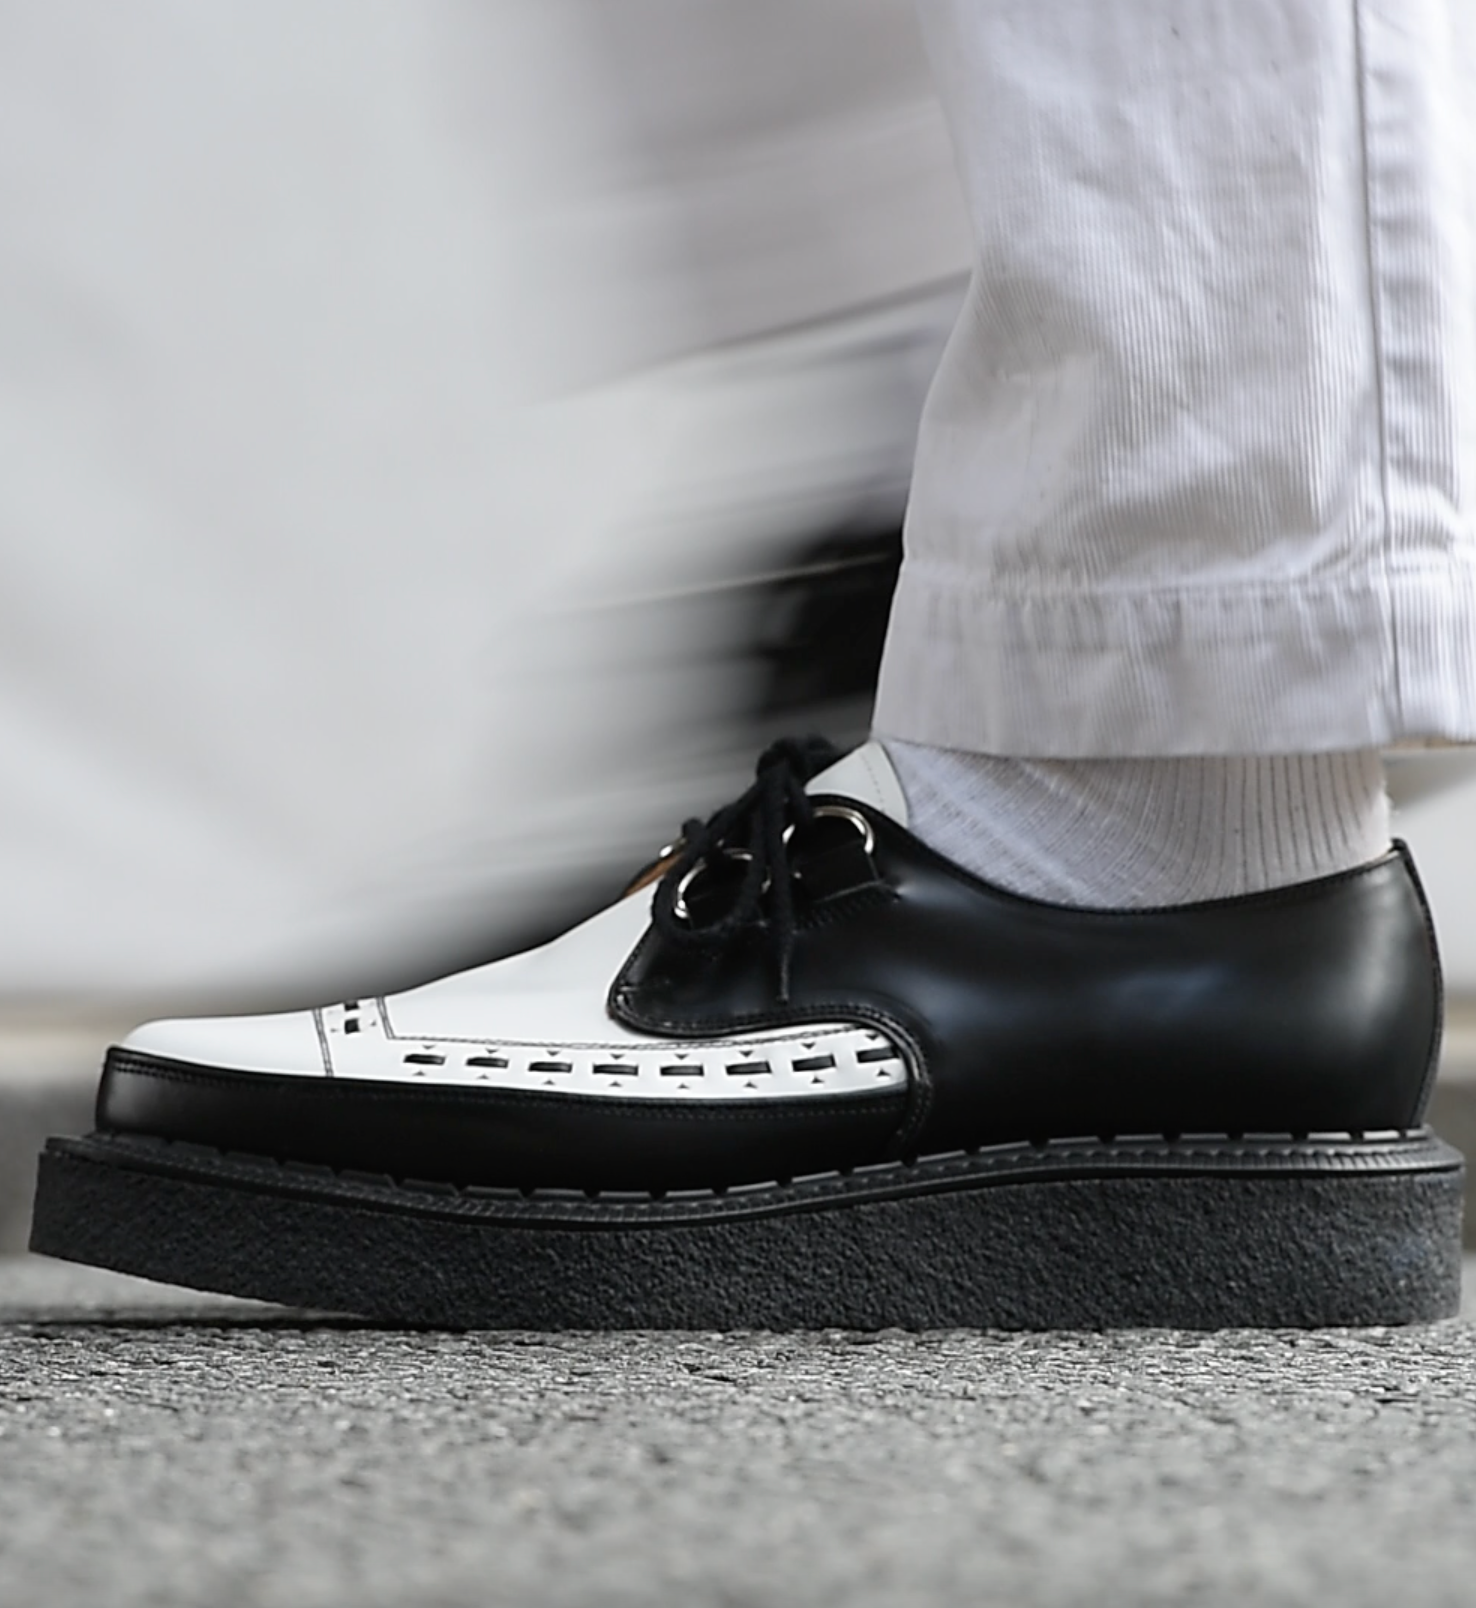 Black and White Diano D-Ring Creeper walking